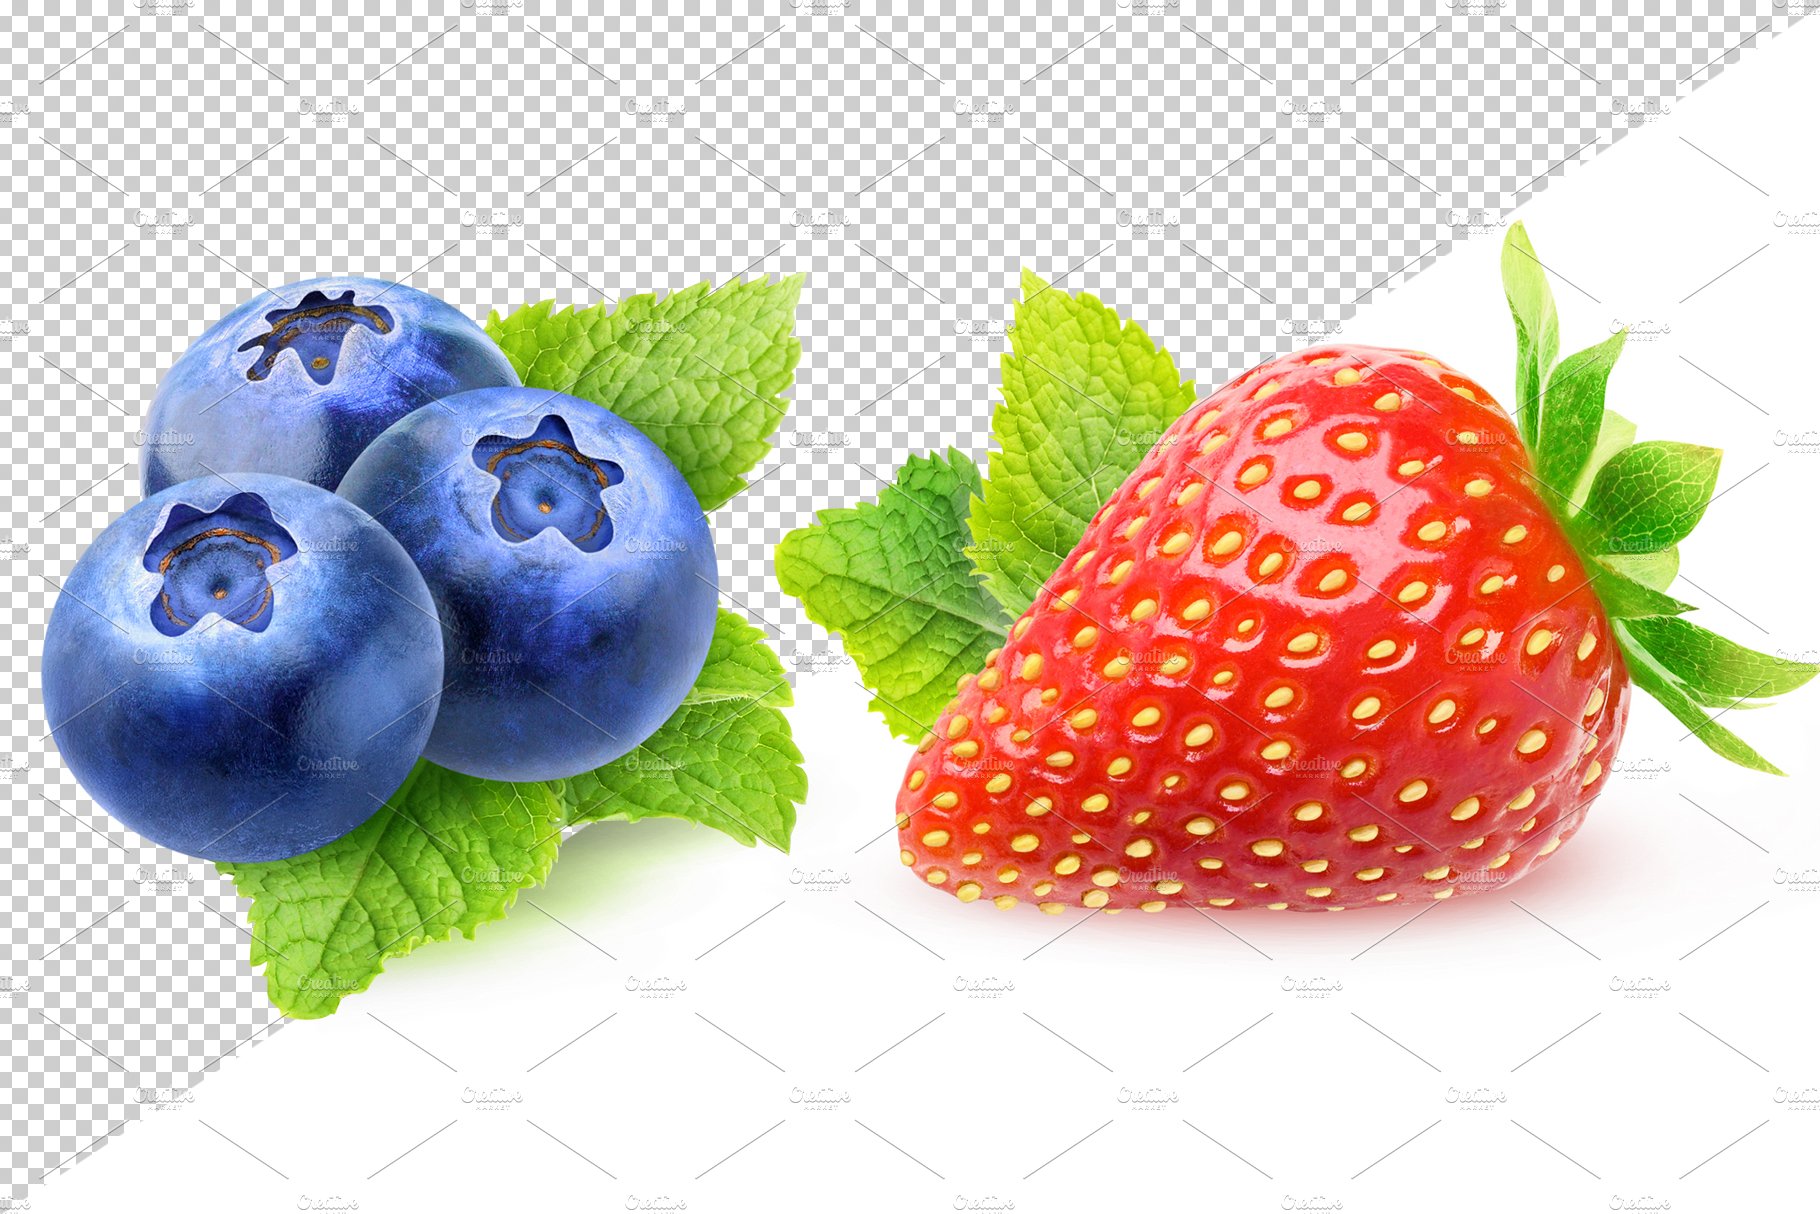 Berries with mint leaf preview image.